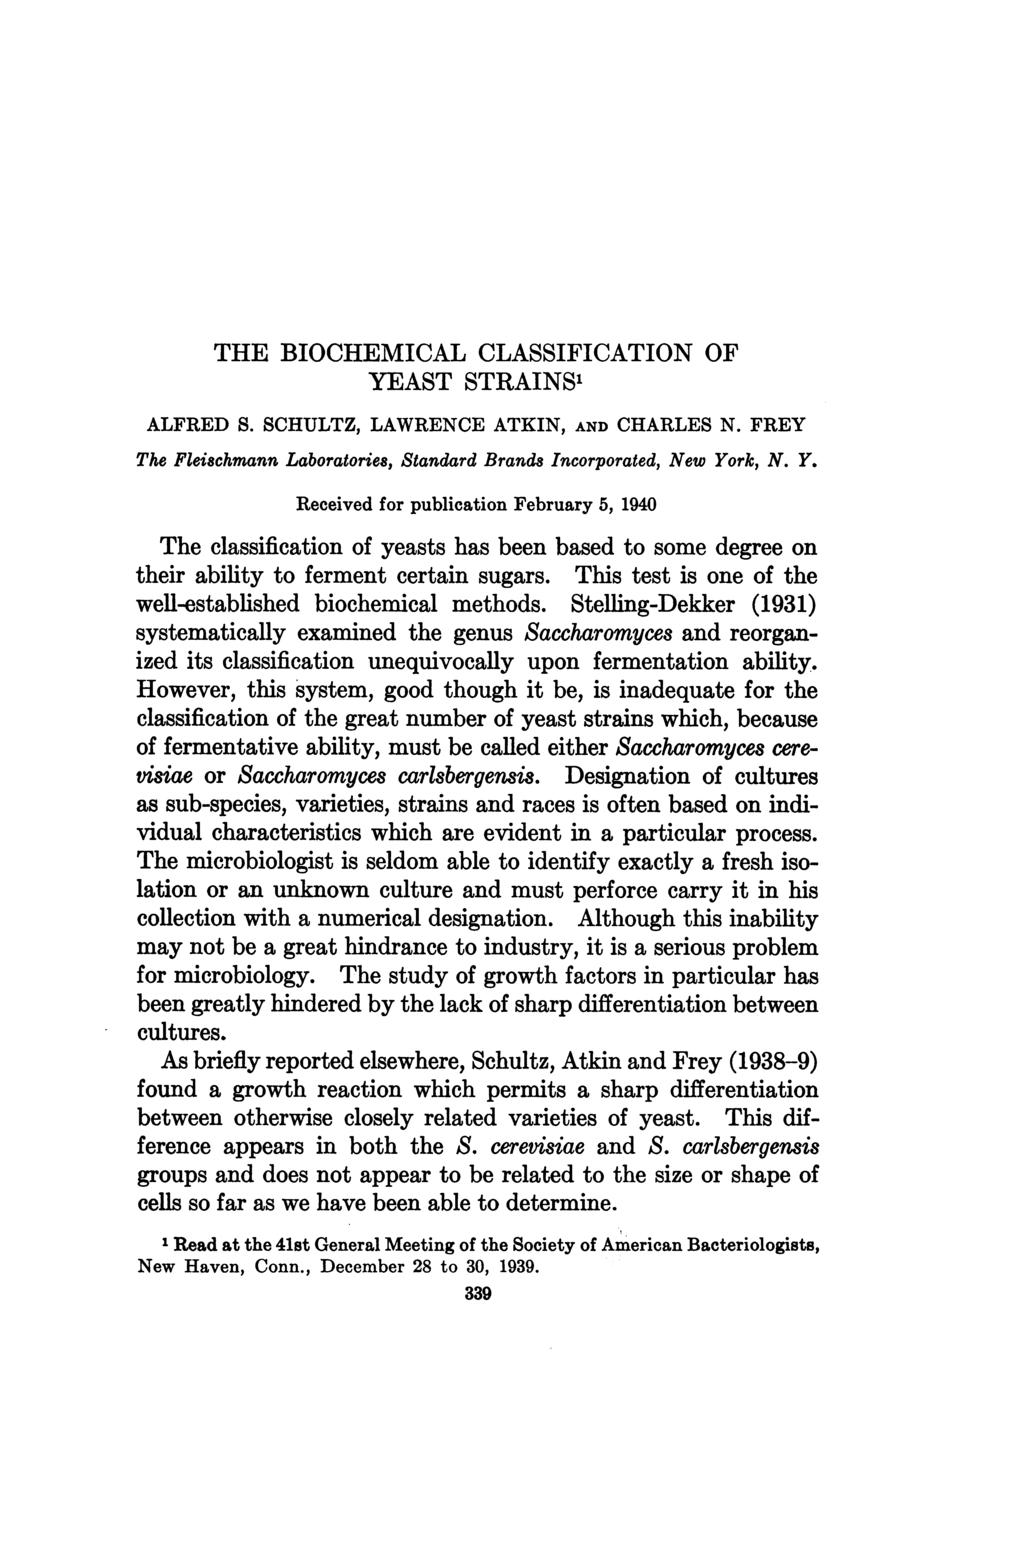 ALFRED S. THE BIOCHEMICAL CLASSIFICATION OF YEAST STRAINS' SCHULTZ, LAWRENCE ATKIN, AND CHARLES N. FREY The Fleischmann Laboratories, Standard Brande Incorporated, New York, N. Y. Received for publication February 5, 1940 The classification of yeasts has been based to some degree on their ability to ferment certain sugars.